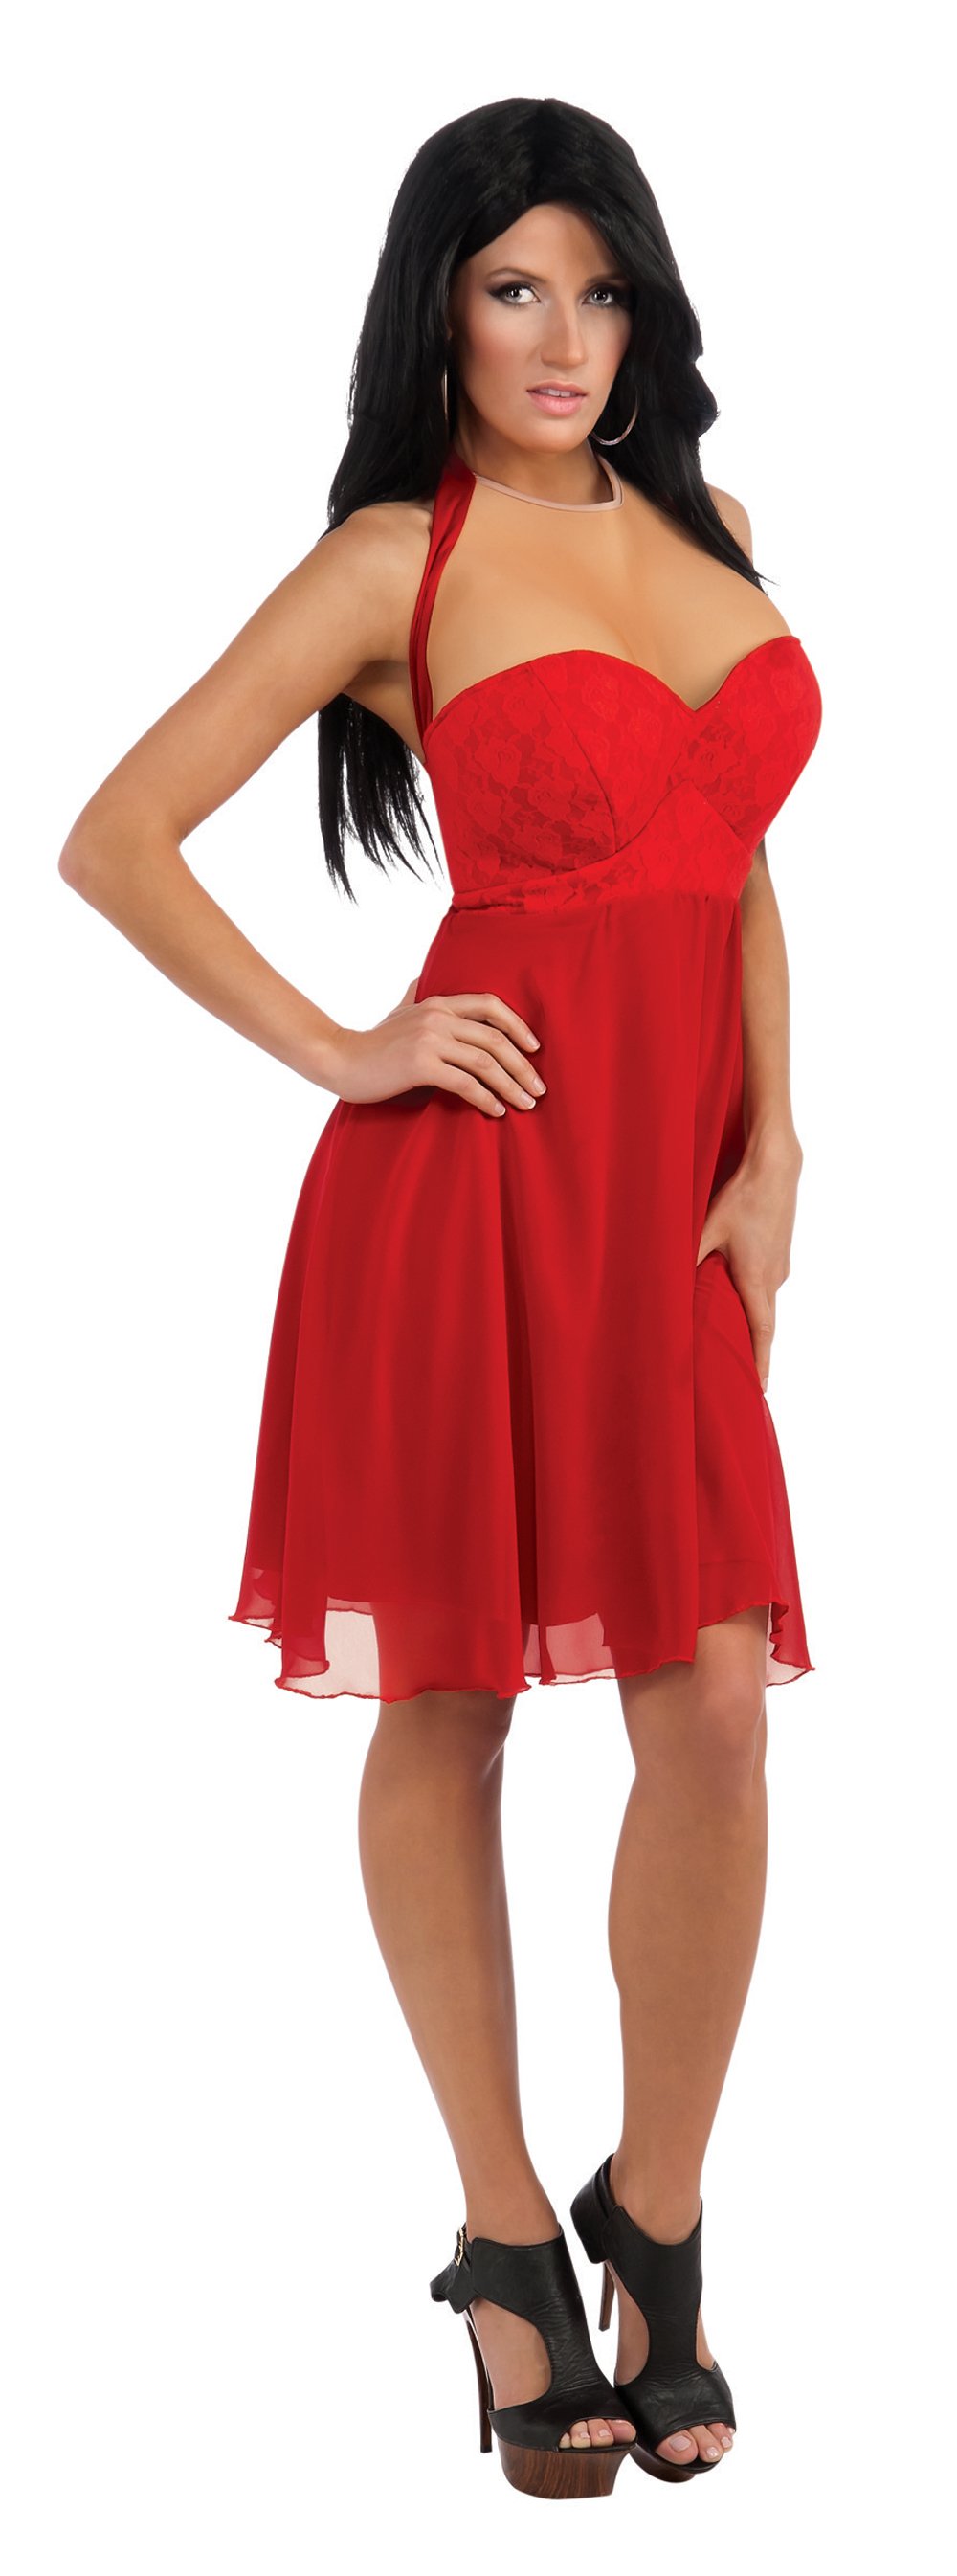 Jersey Shore JWoWW Red Dress Adult Costume. 